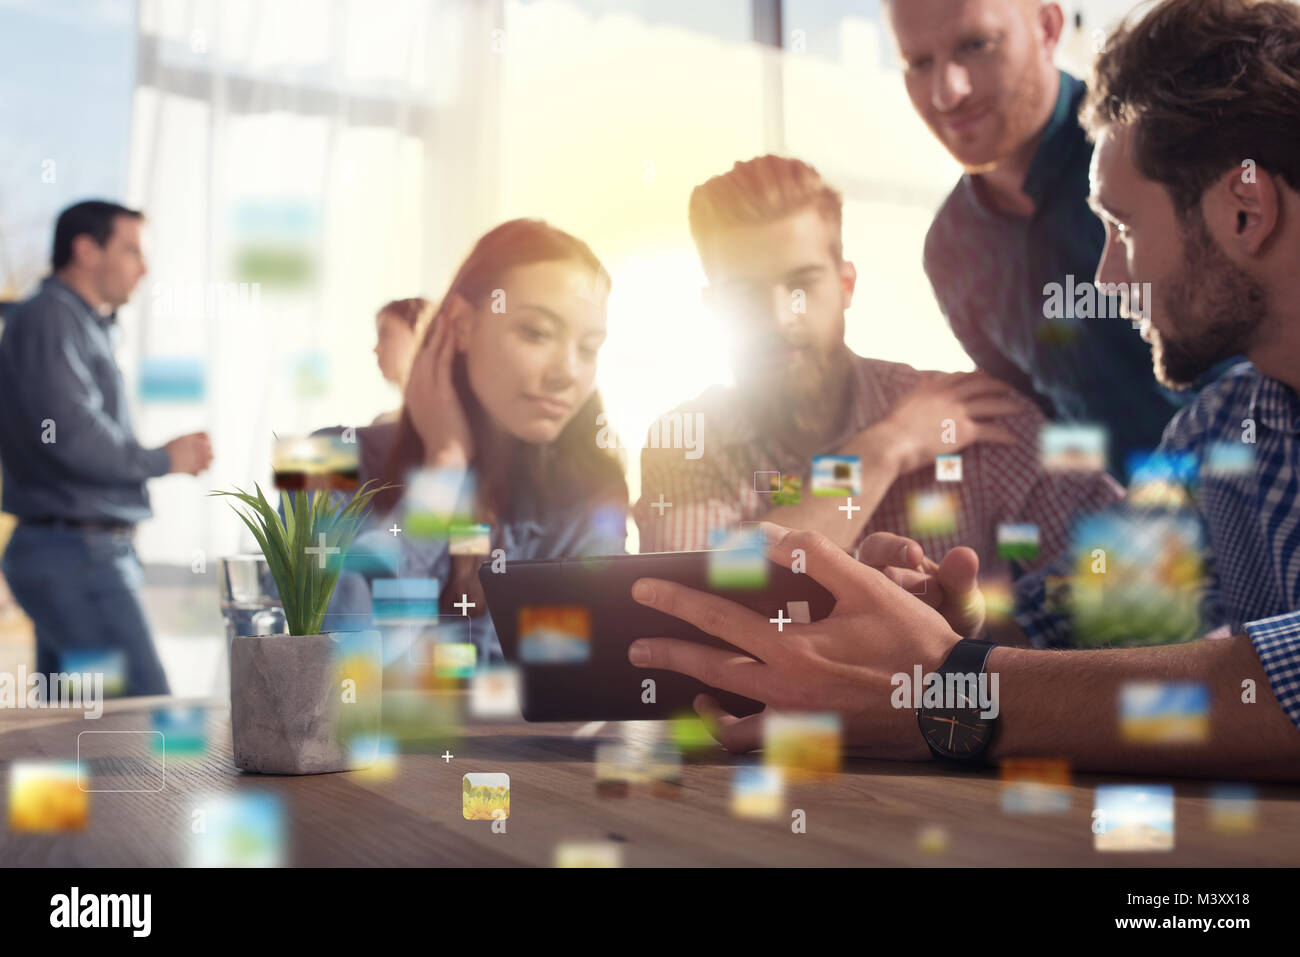 Businessperson in office connected on internet network. concept of partnership and teamwork Stock Photo